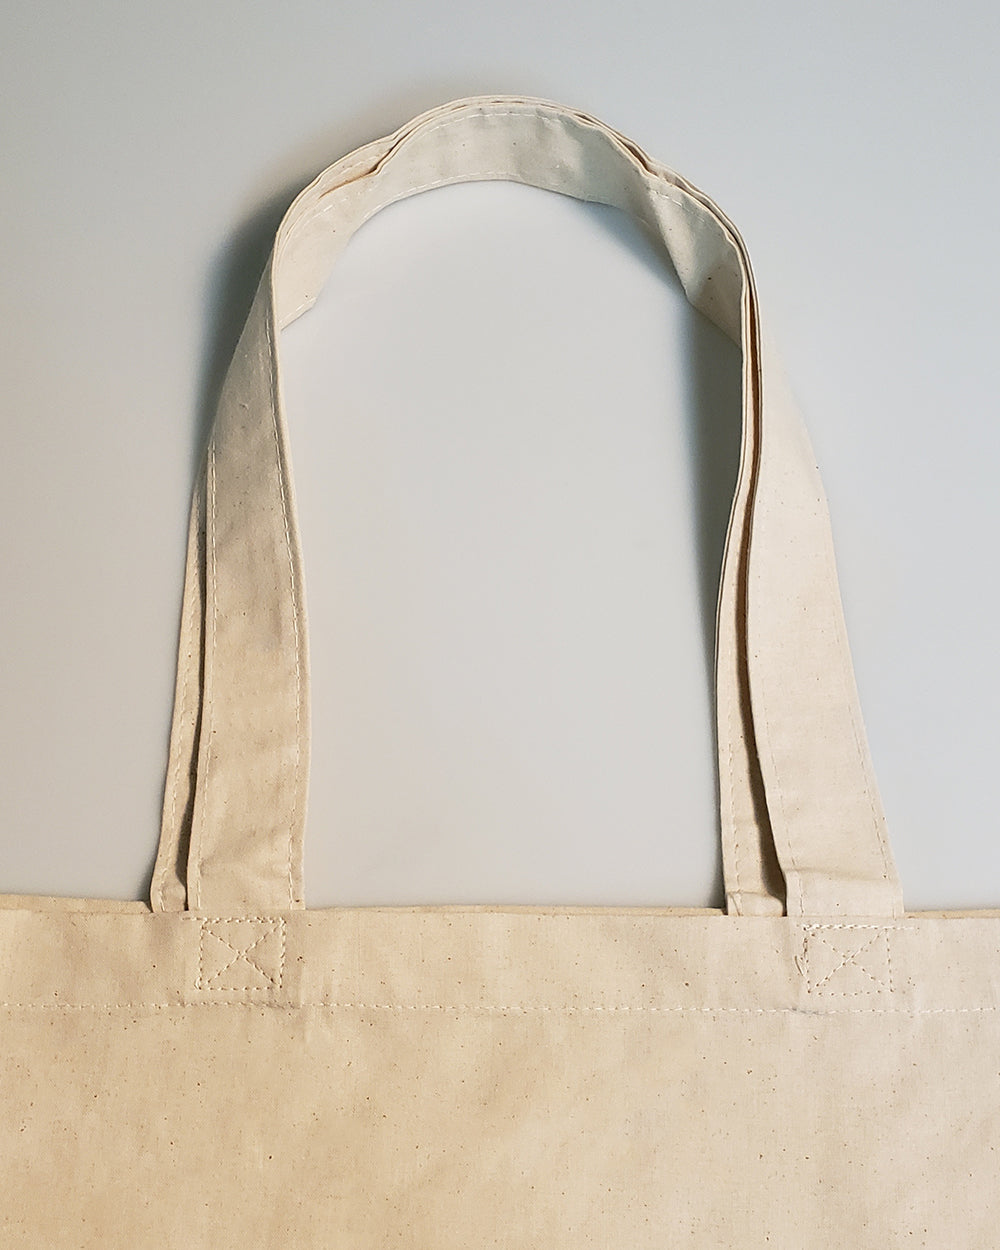 Foldable Cotton Tote Bags, Cotton Tote Bags Pouch, Organic Canvas Bag